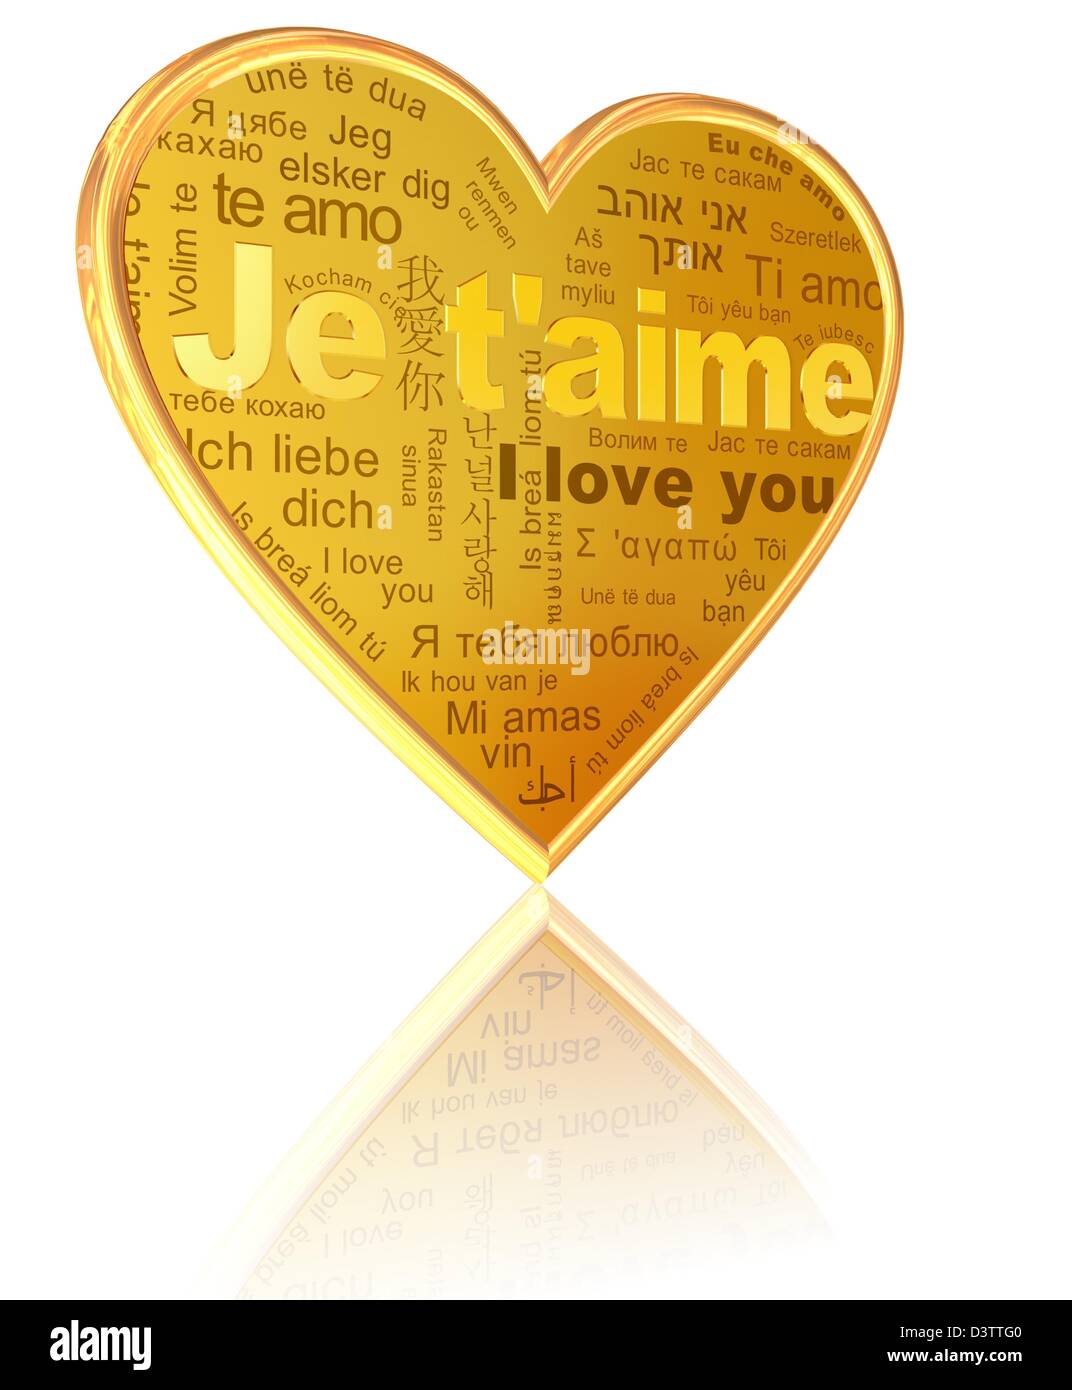 Je t'aime - golden words in different languages on the heart Stock Photo